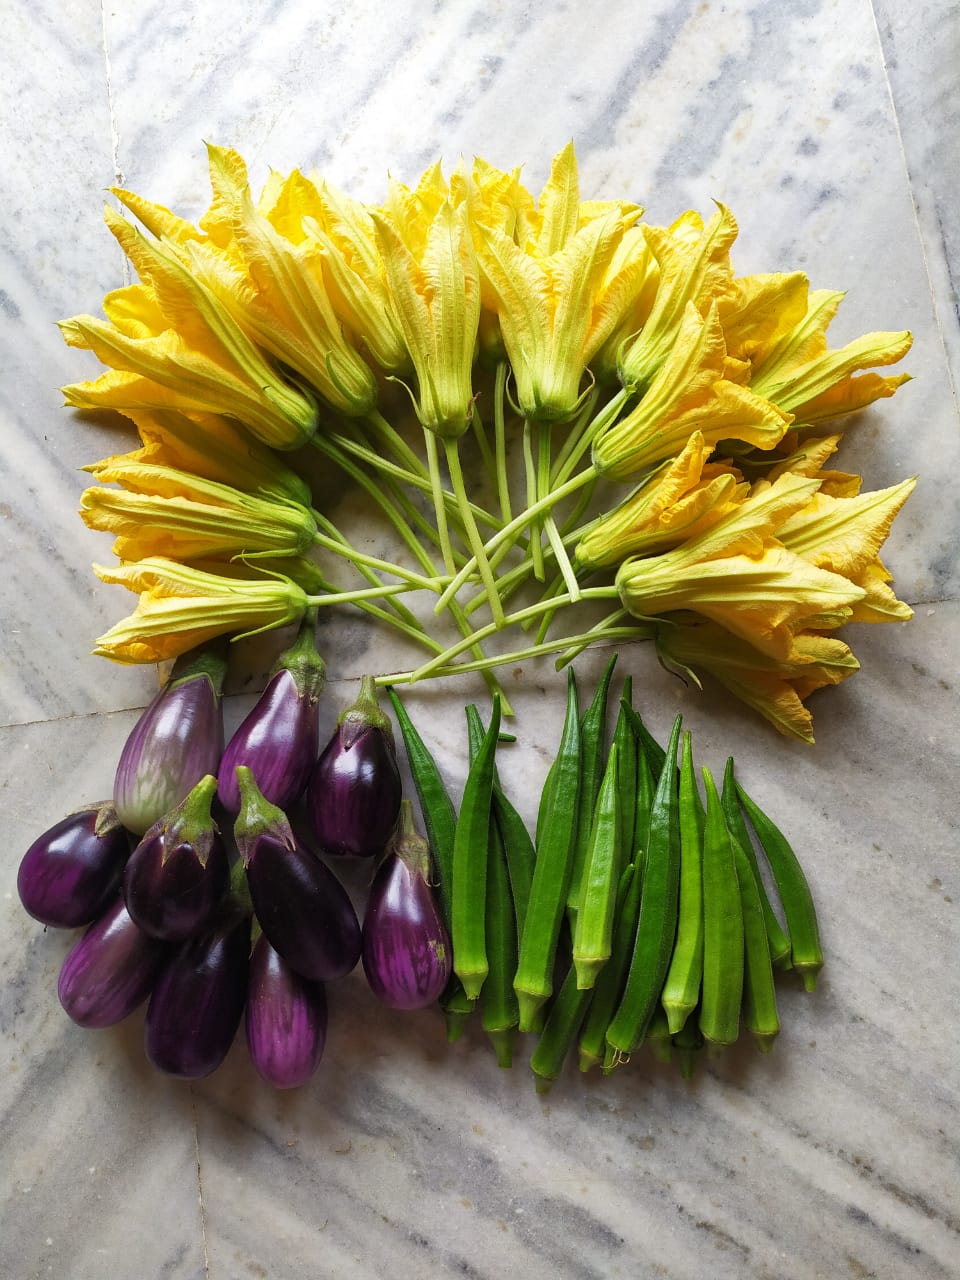 Some brinjal, lady's finger and flowers from the terrace garden. 